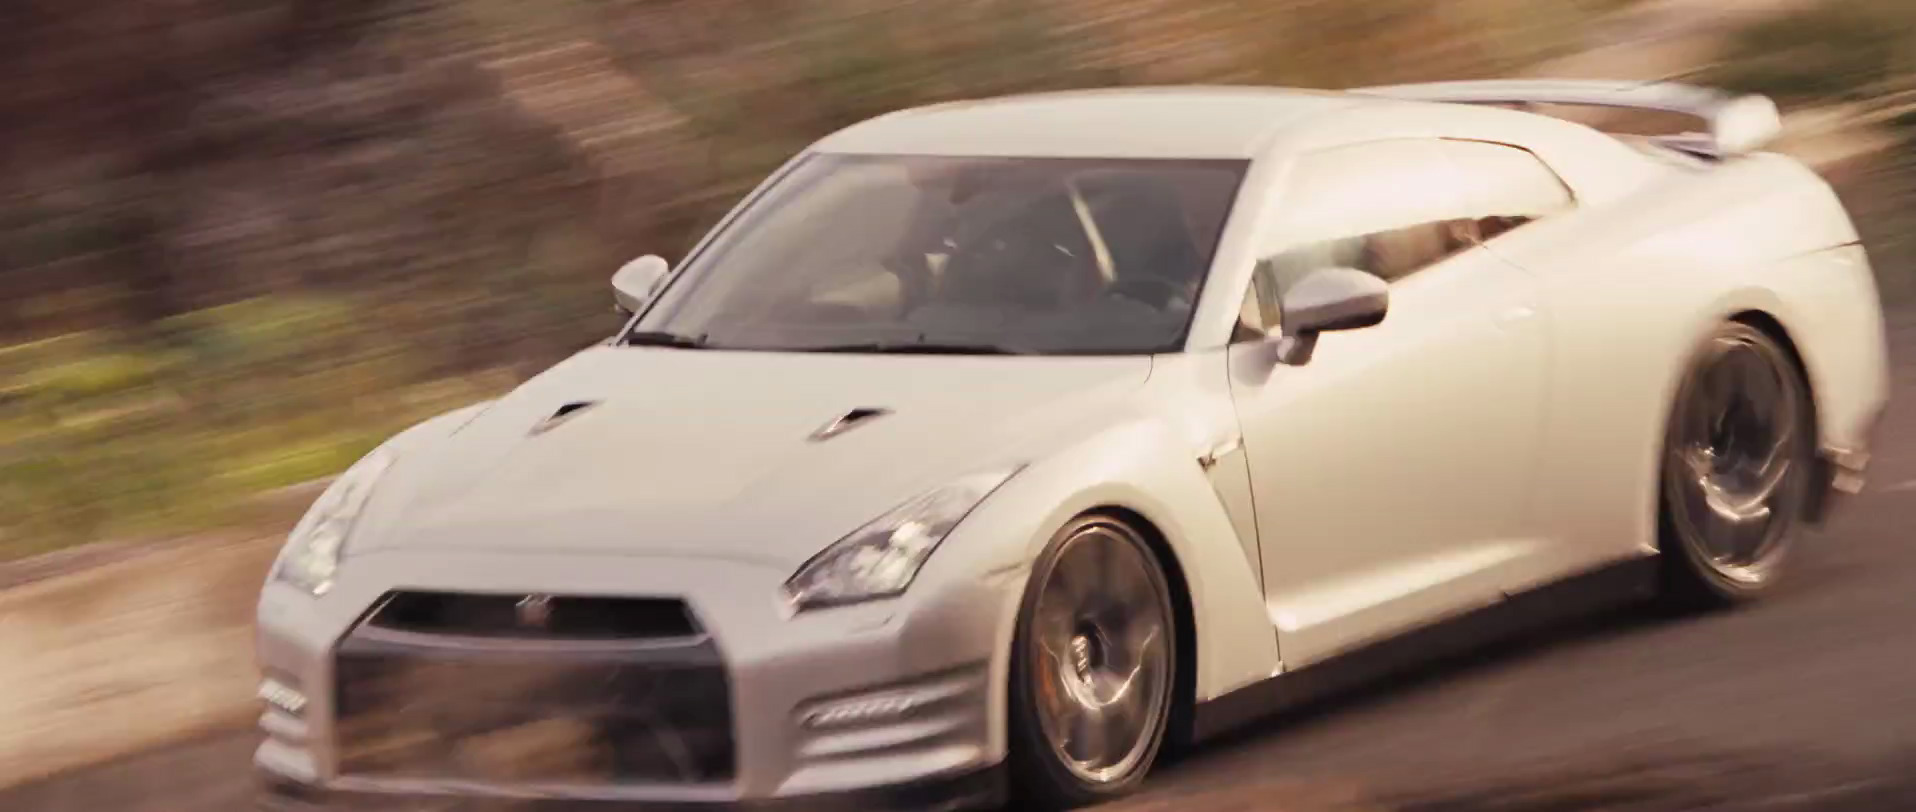 2011 Nissan GT-R R35 | The Fast and the Furious Wiki | FANDOM powered by Wikia1916 x 812